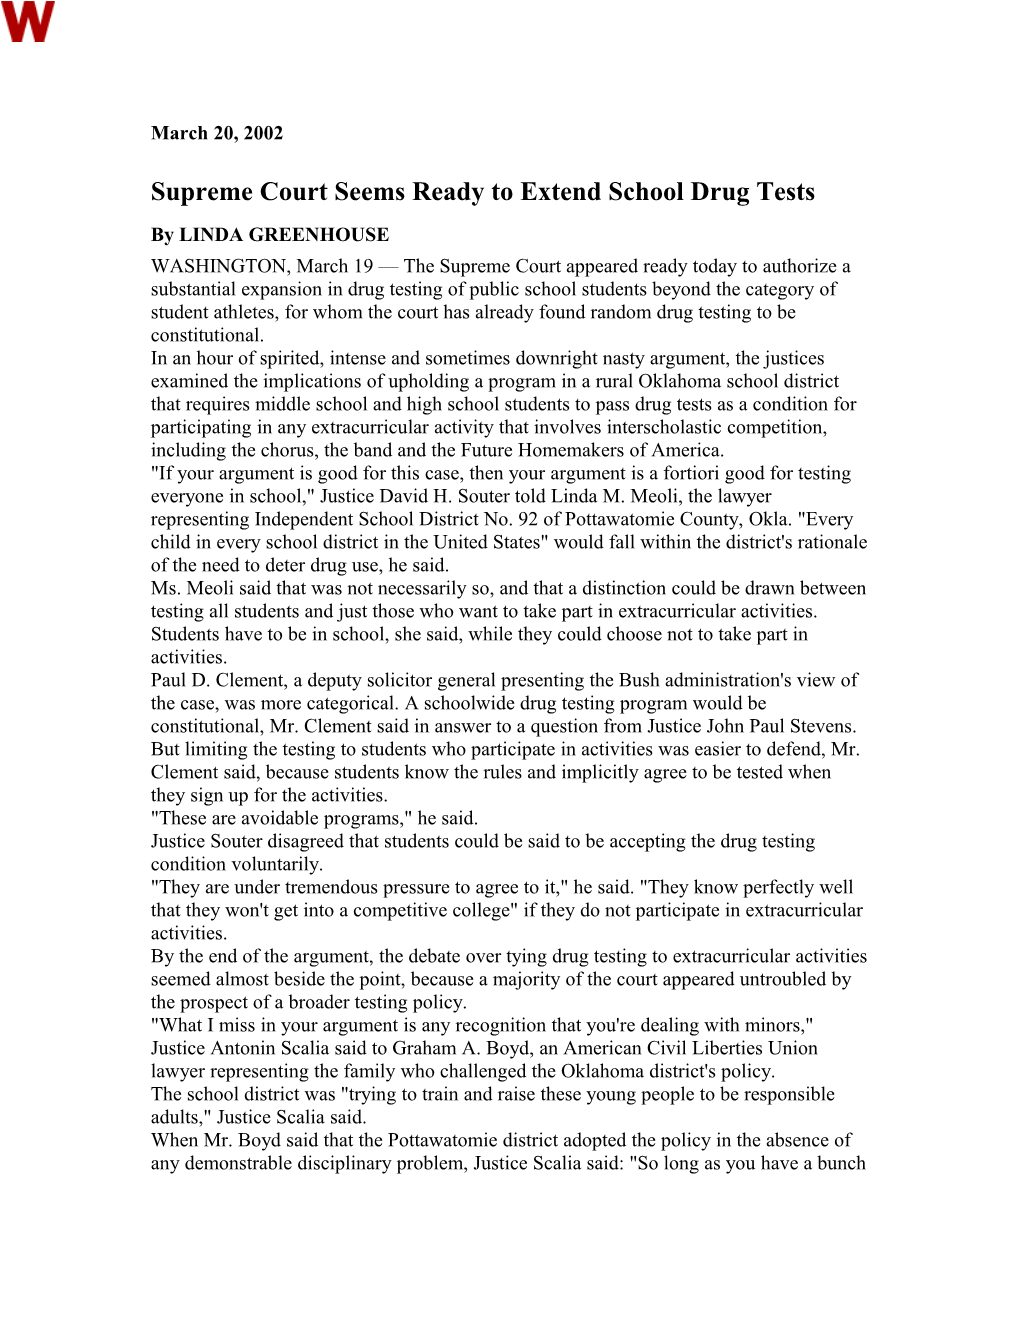 Supreme Court Seems Ready to Extend School Drug Tests